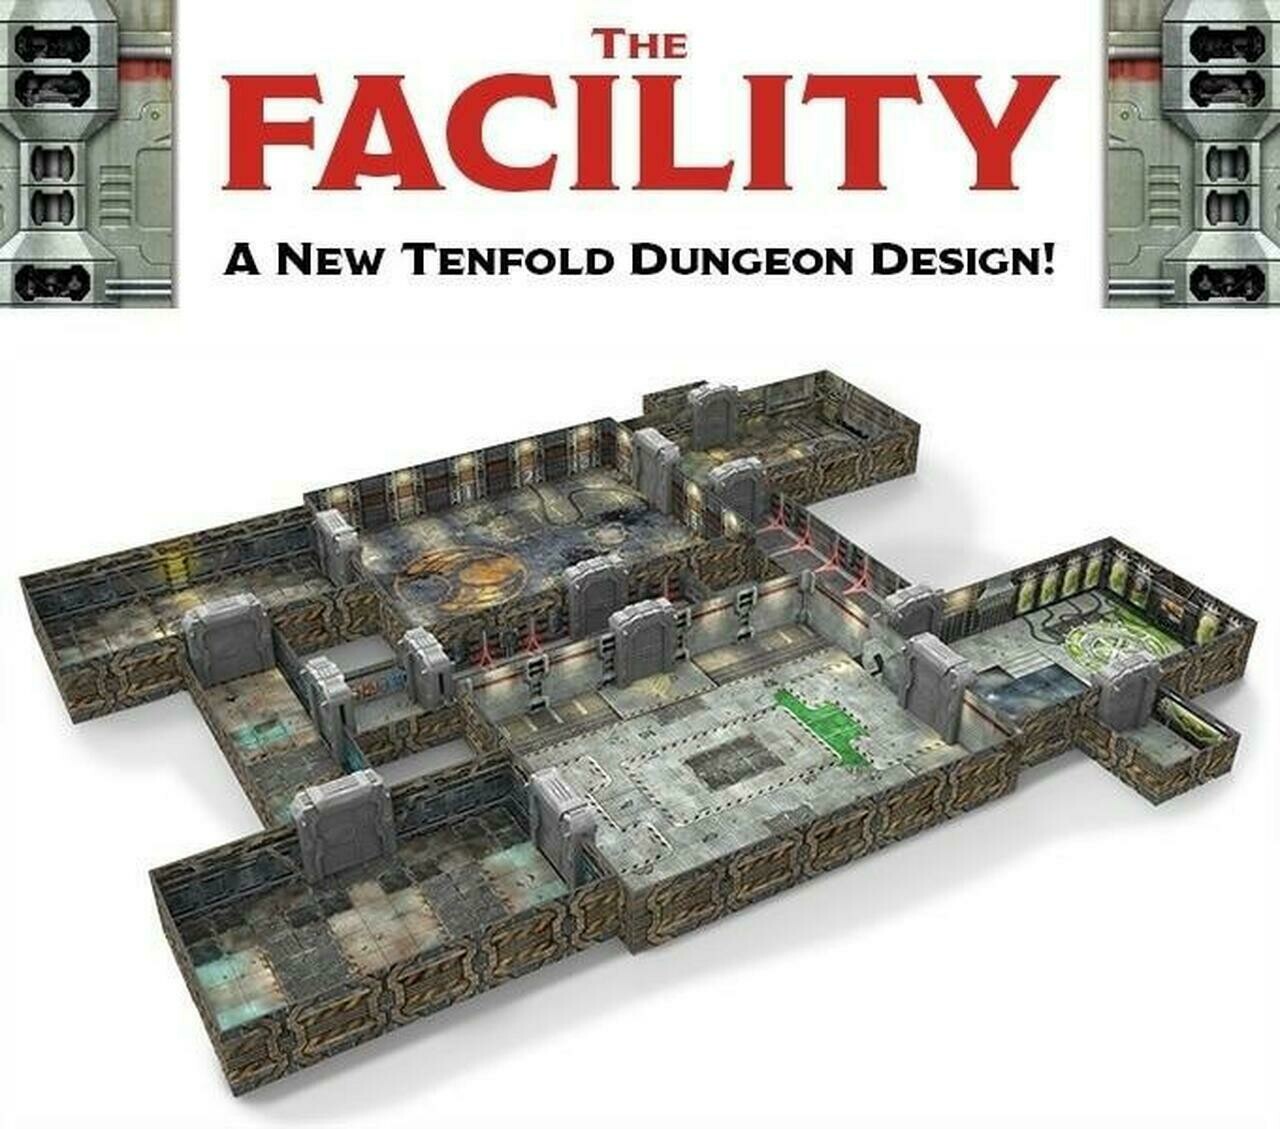 Tenfold Dungeon: The Facility